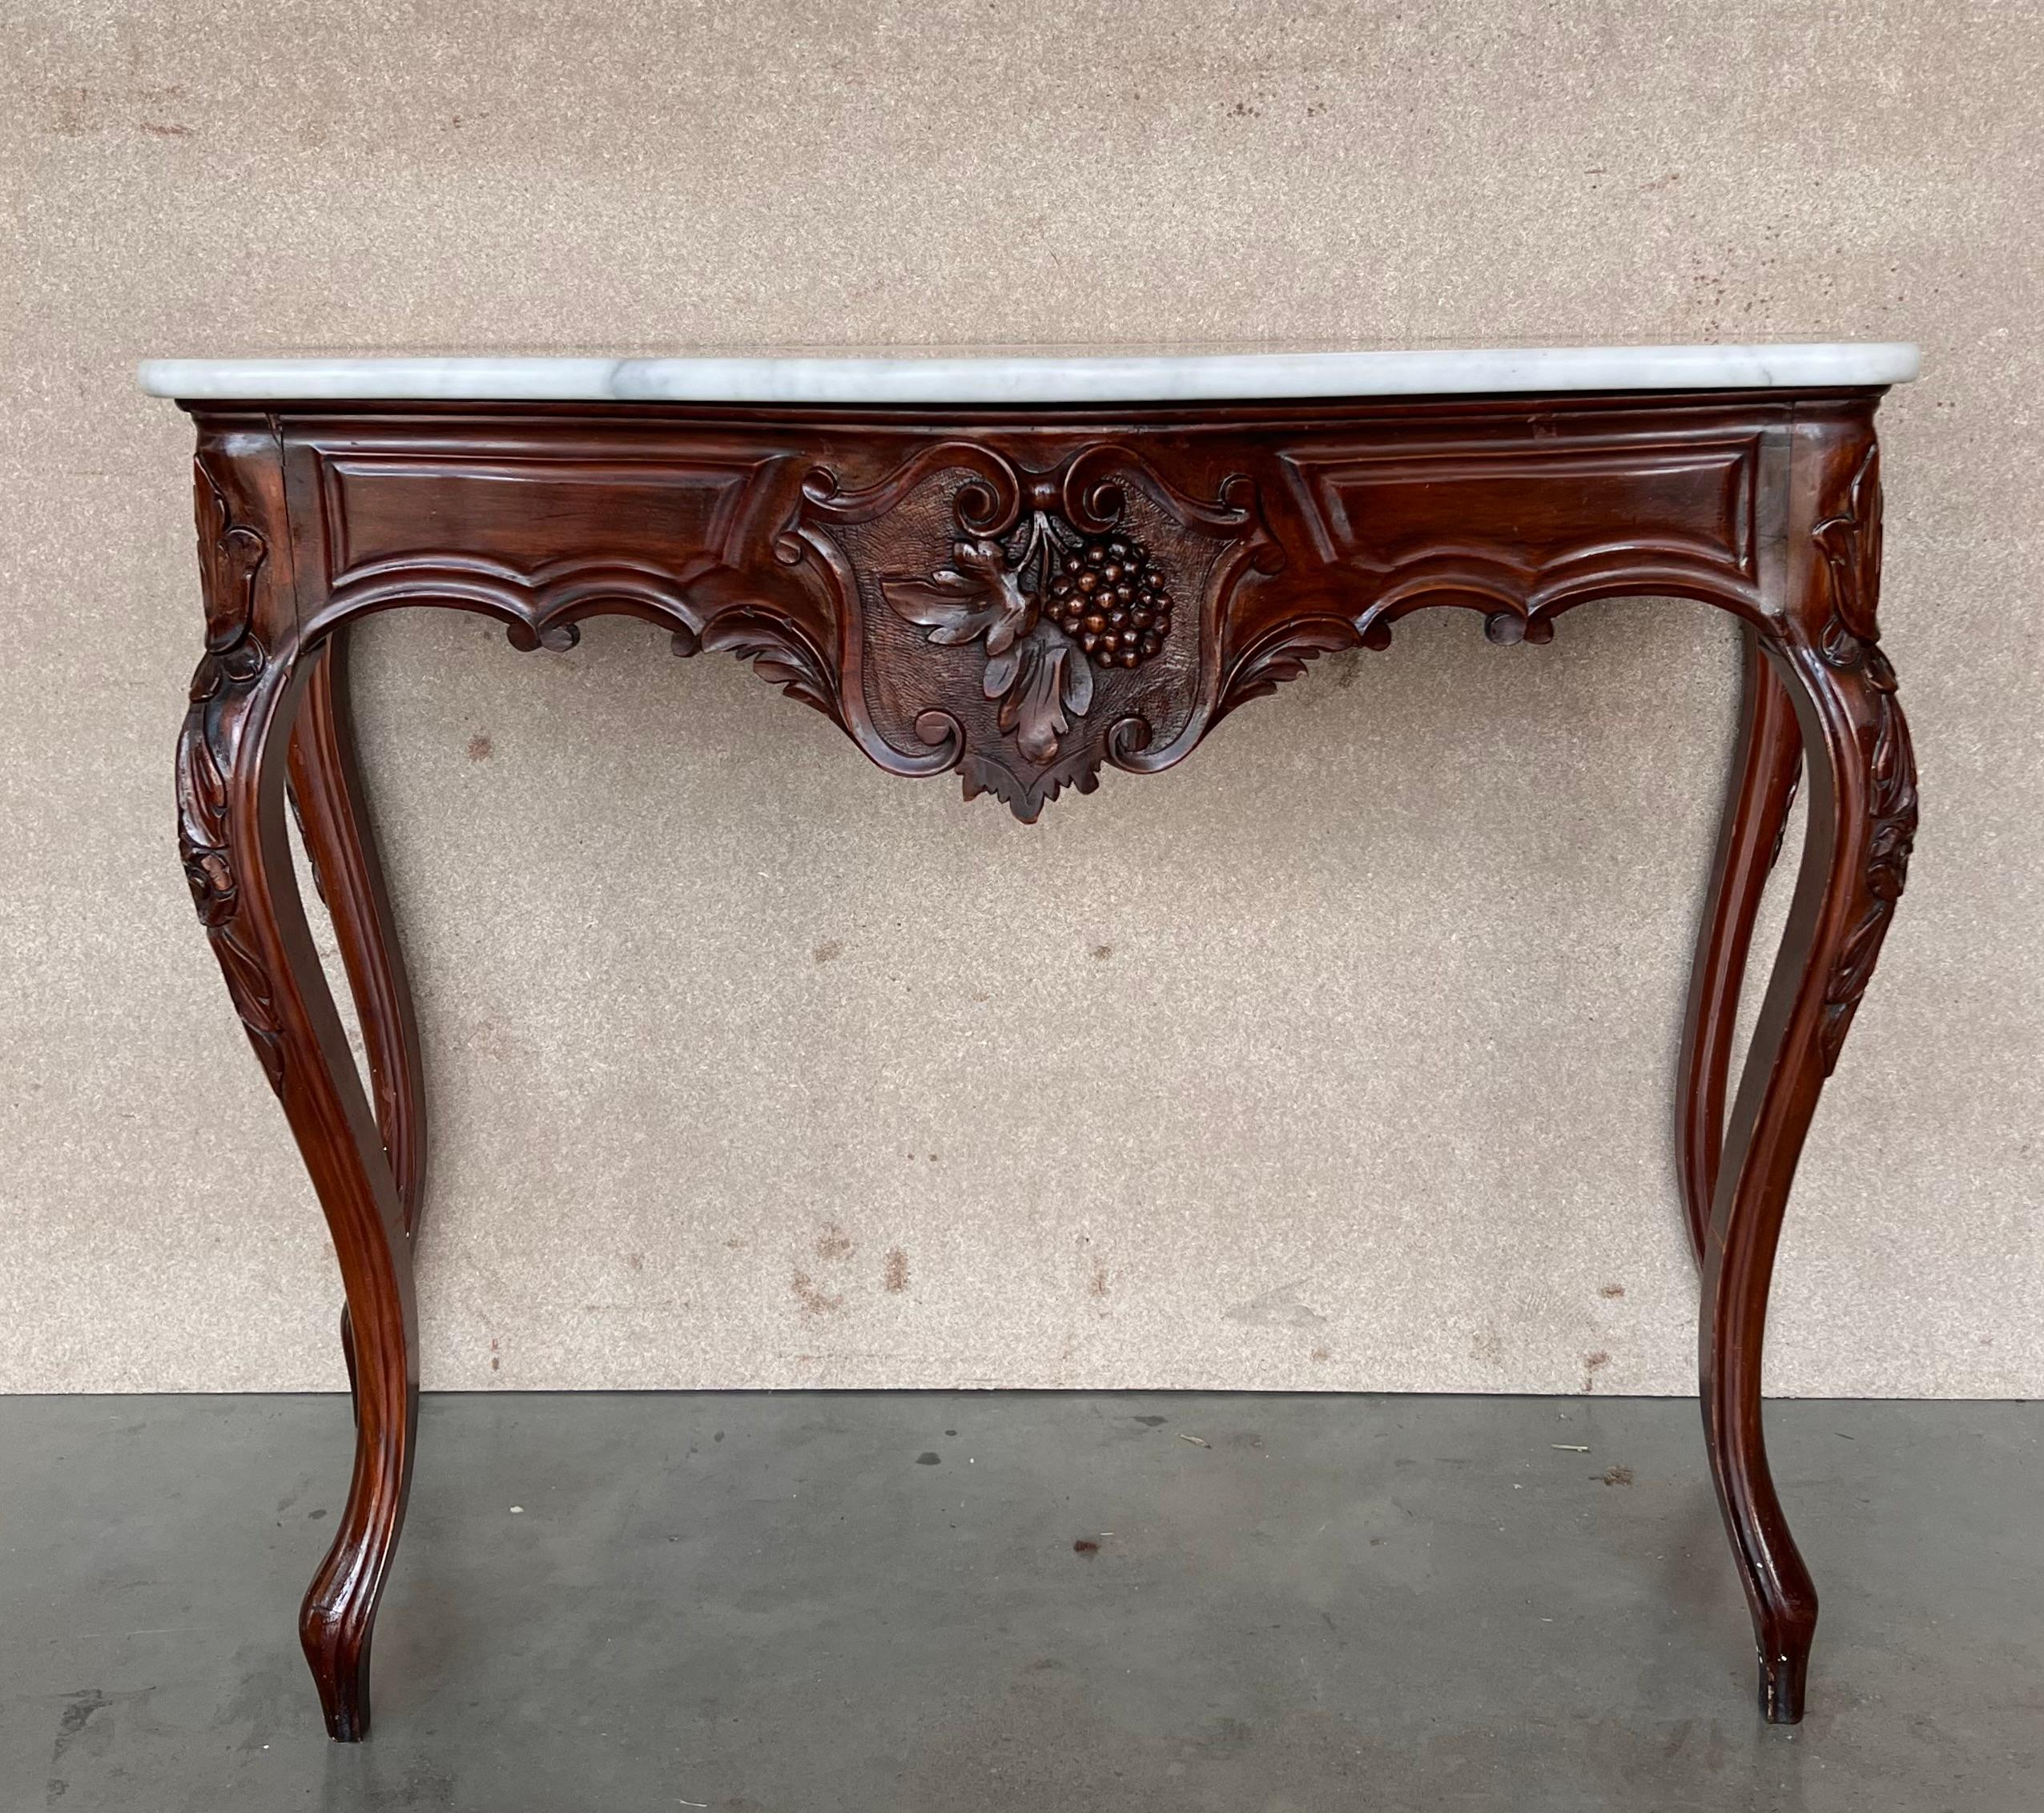 20th French Regency carved walnut console table with marble top

20th century French Regence style beautifully carved with leaves walnut console. White marble top with carved front, over hand-carved frieze supported by four cabriole legs. Very